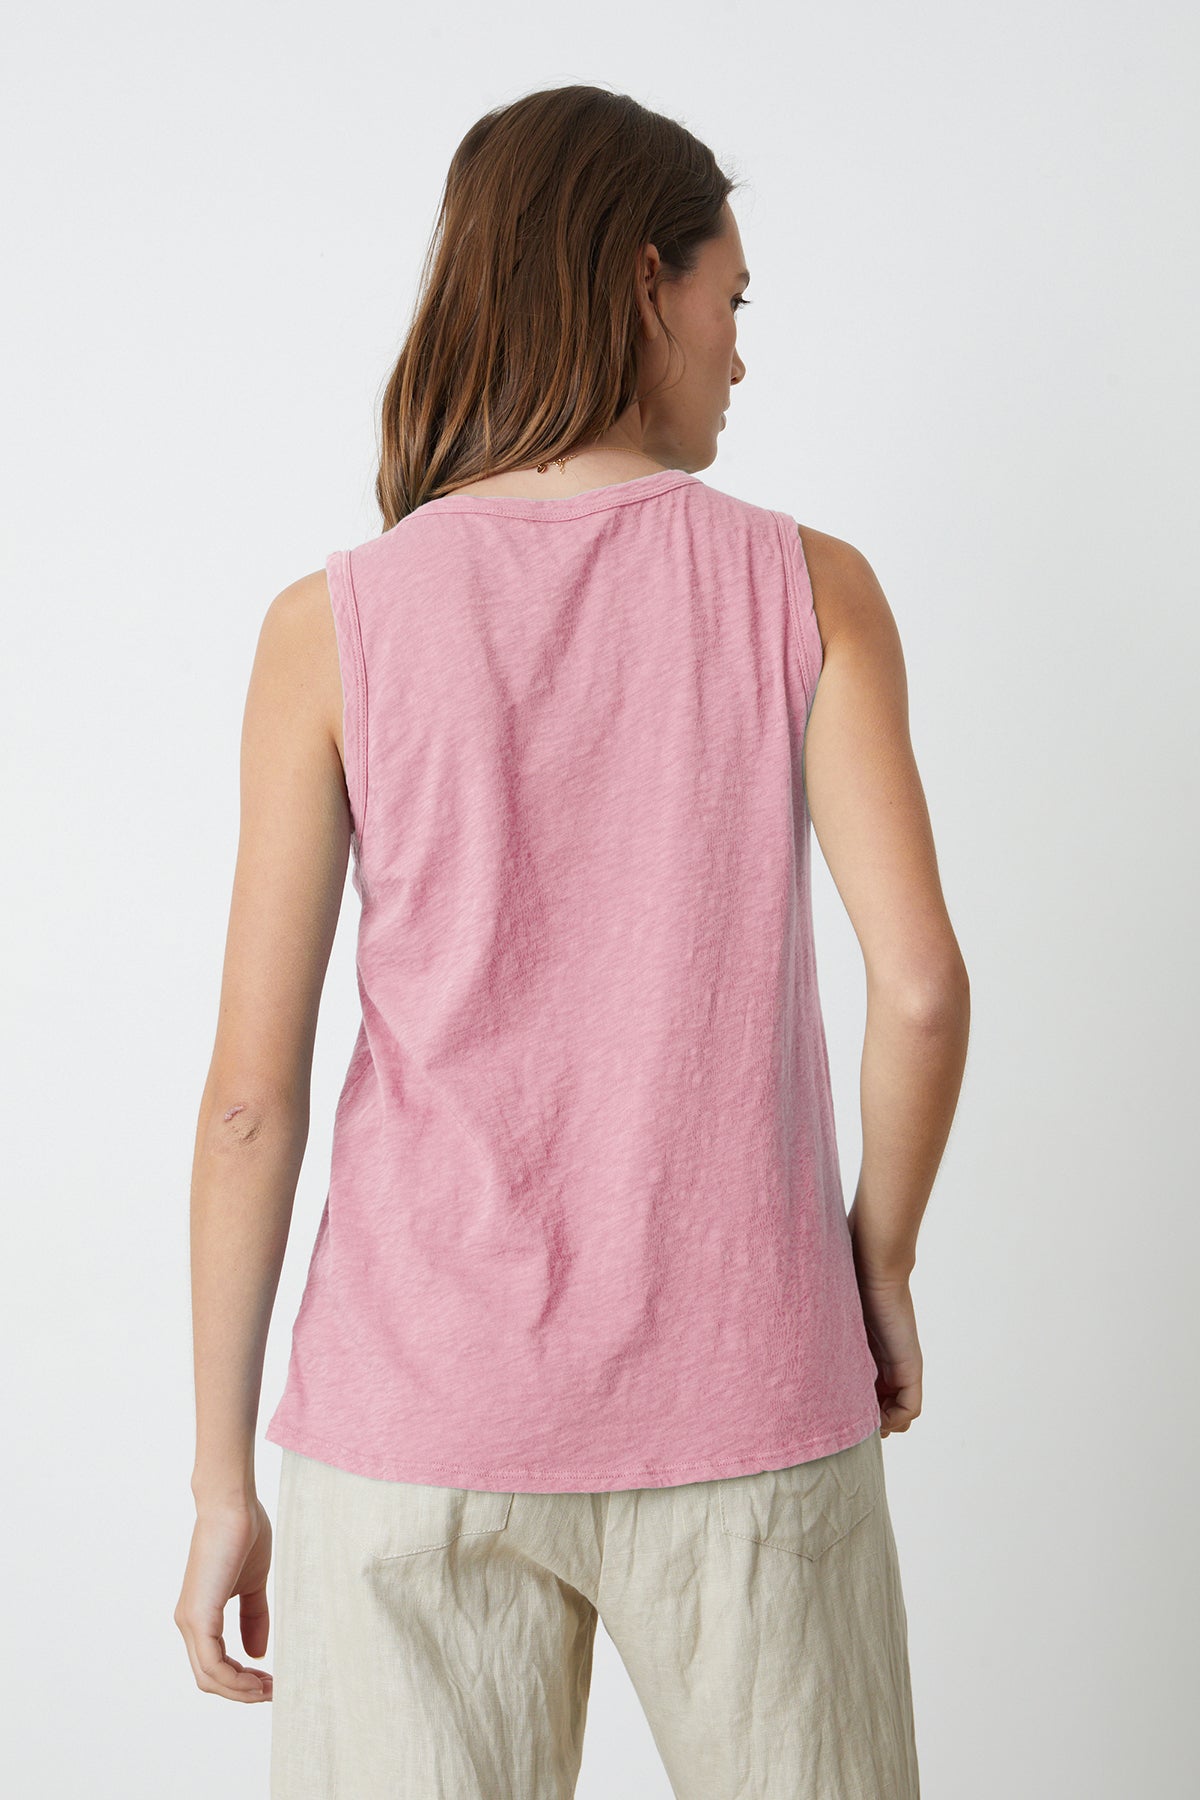 The back view of a woman sporting a Velvet by Graham & Spencer TAURUS COTTON SLUB TANK.-35982876672193